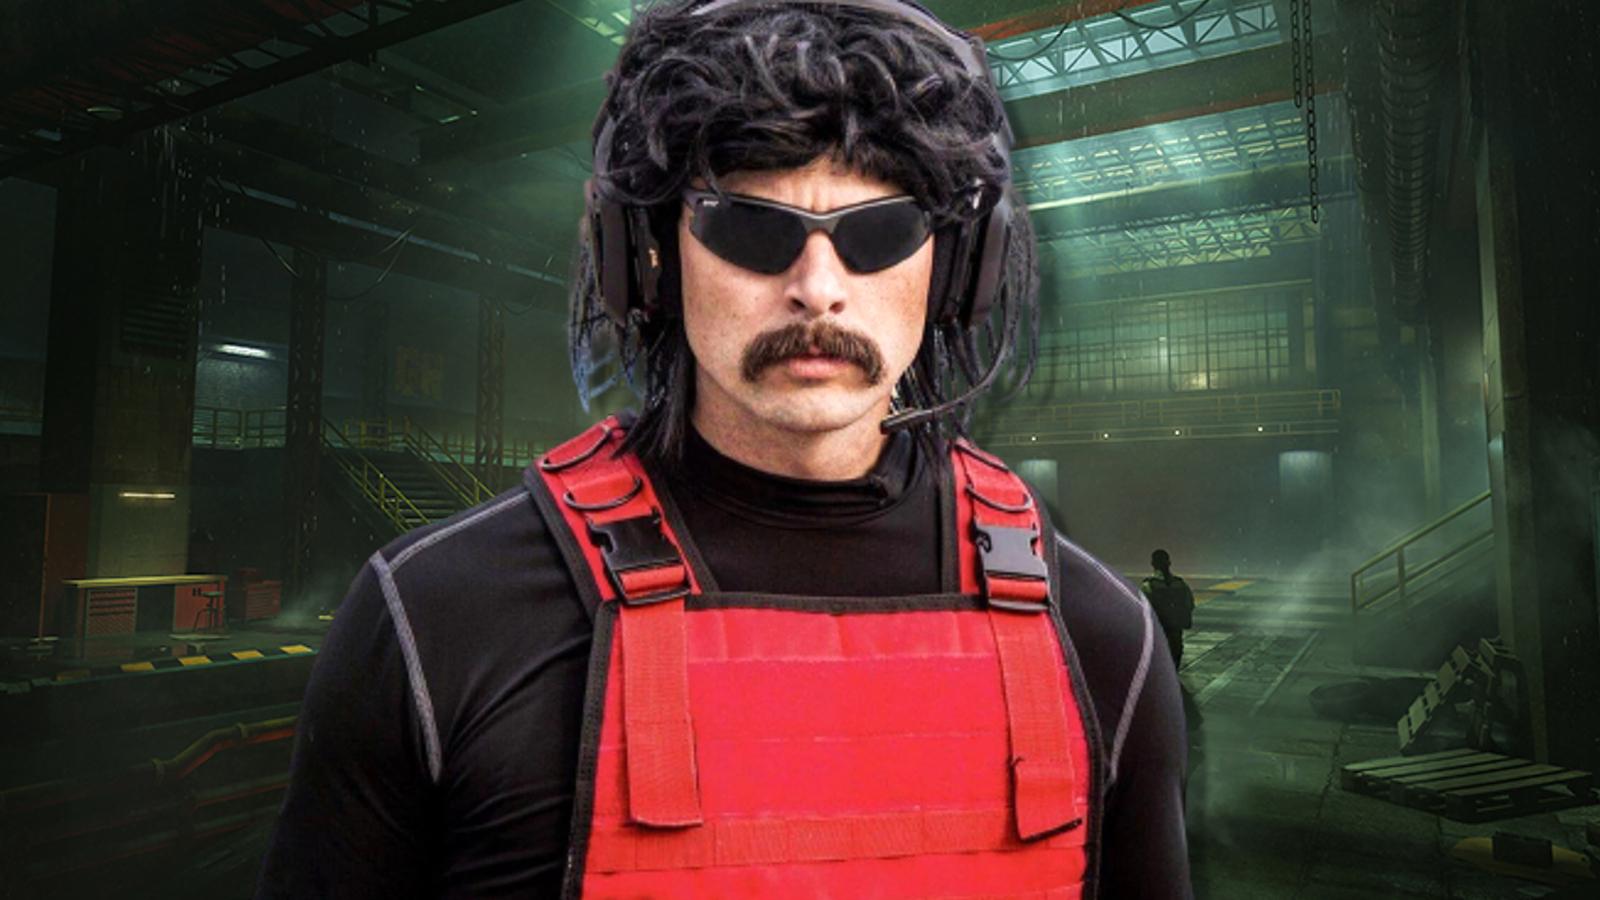 Dr Disrespect in front of Deadrop background.